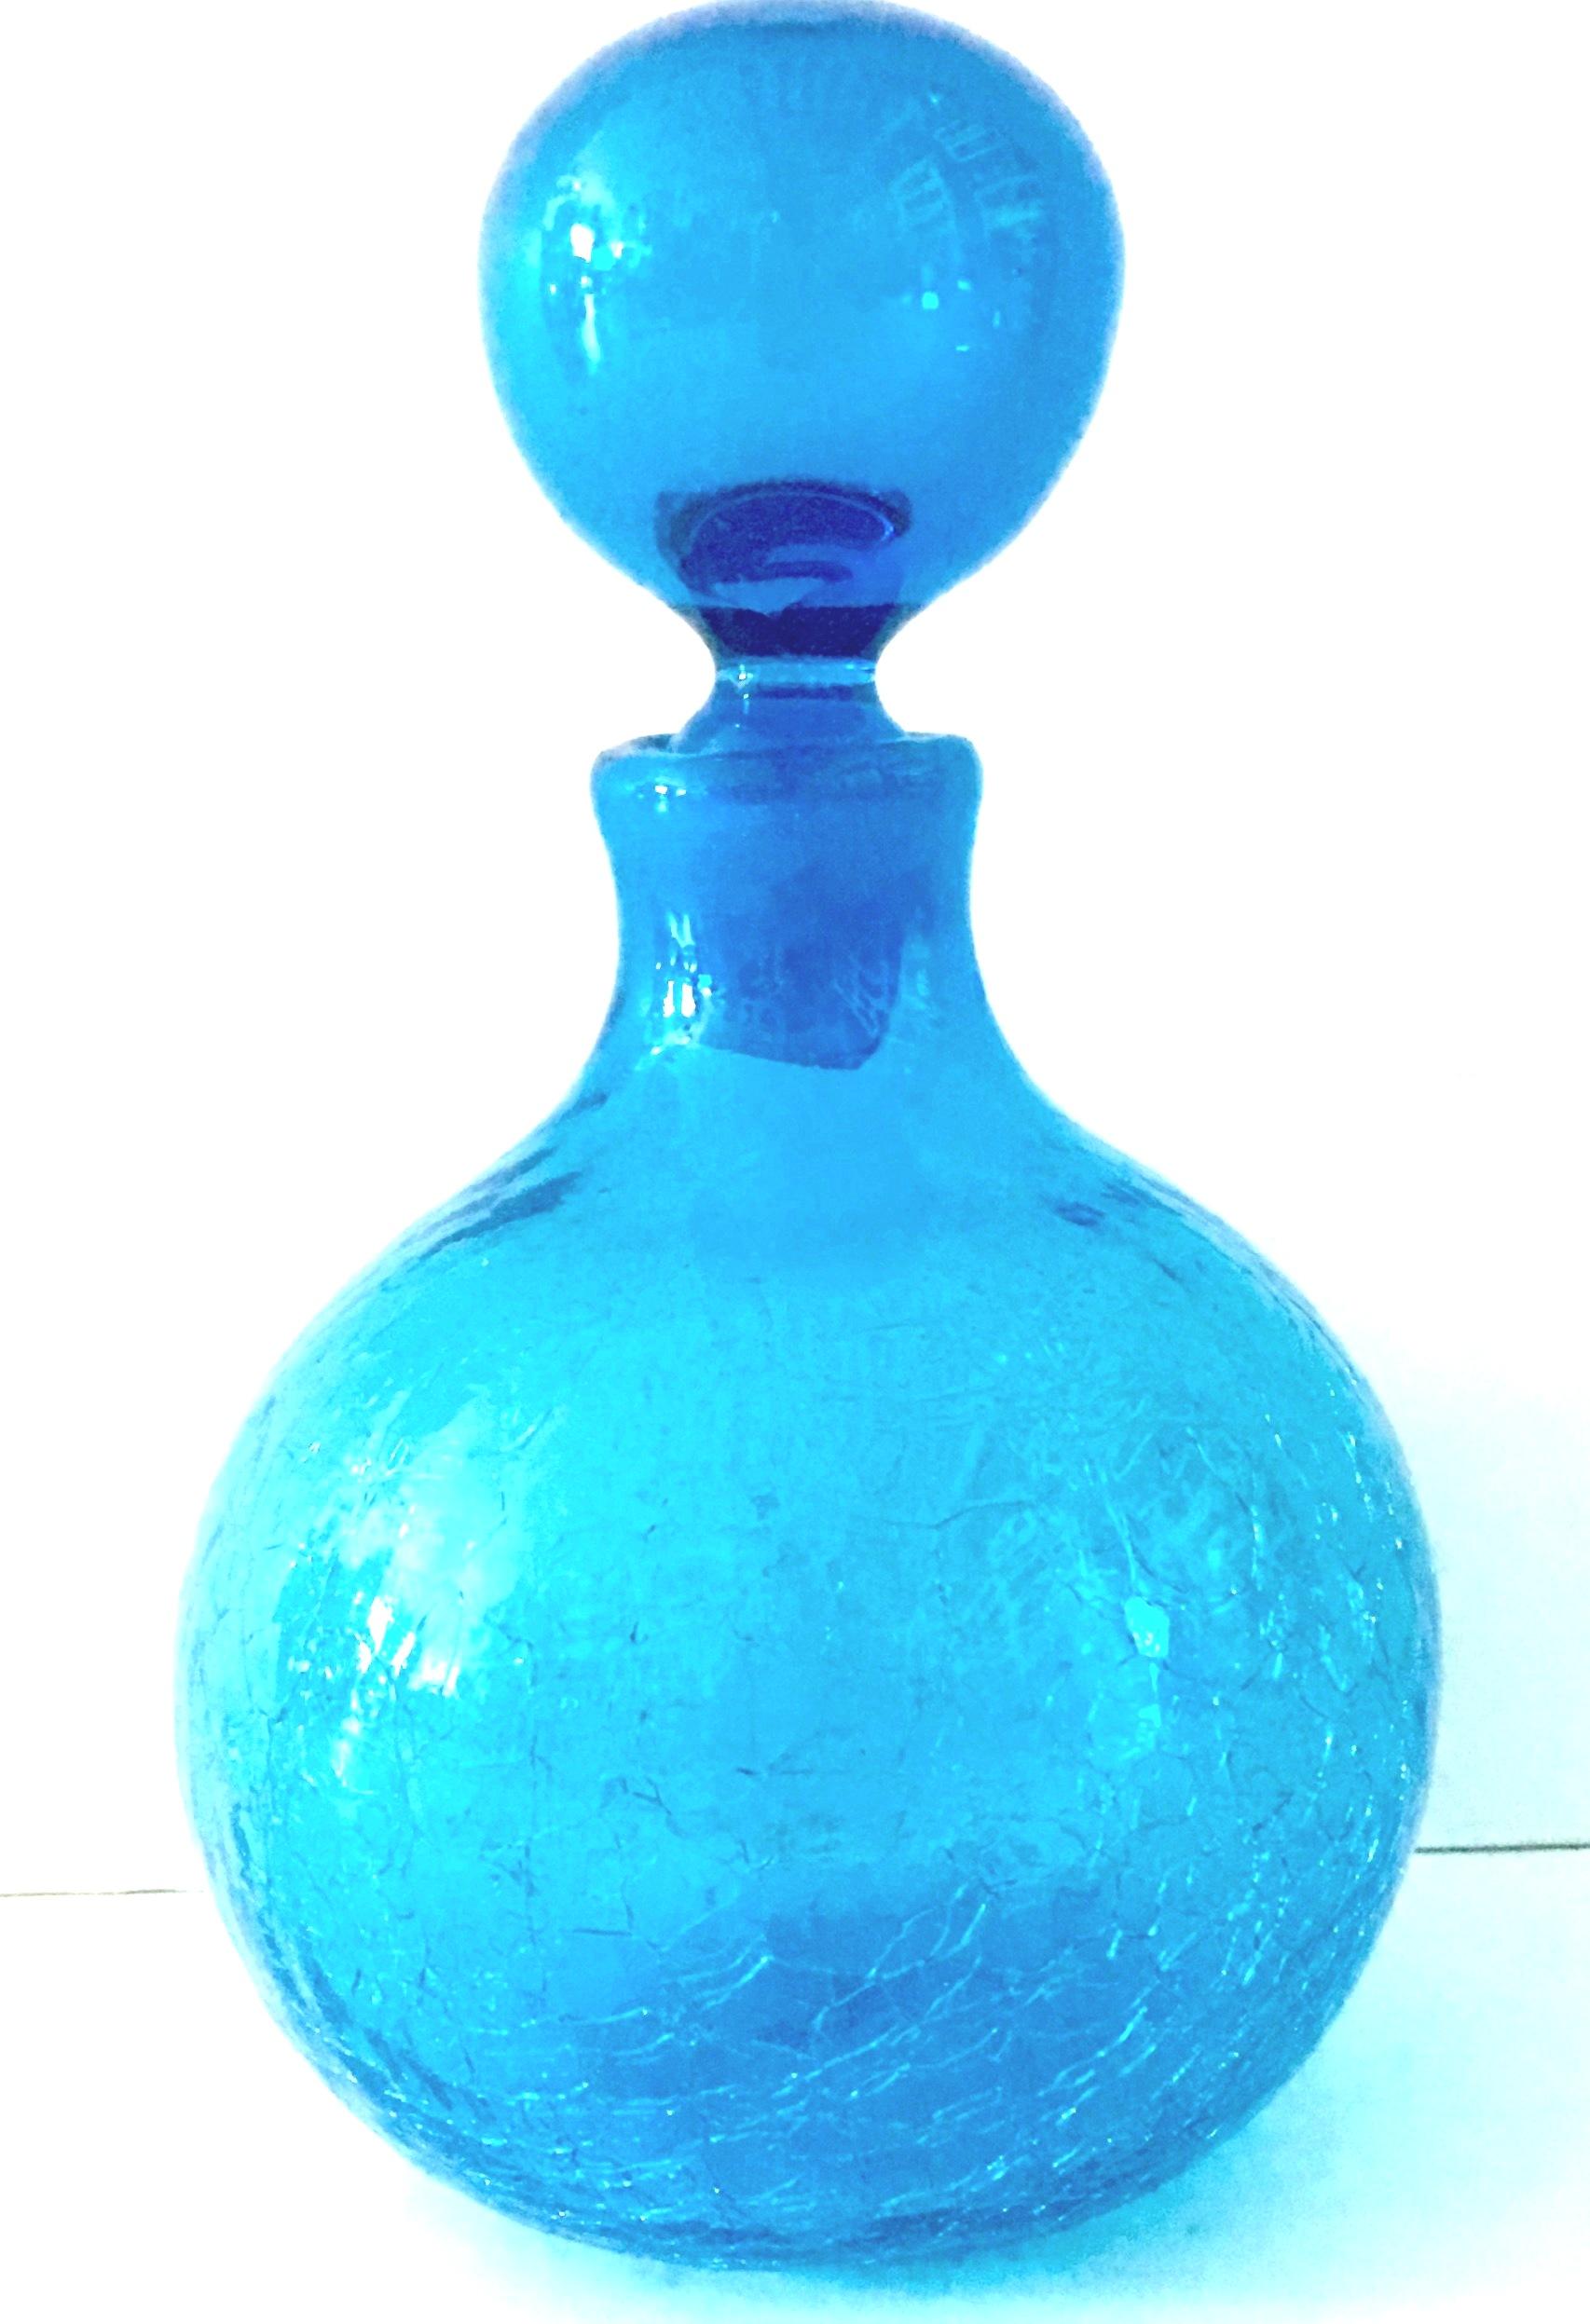 Mid-20th Century Modern Blown Crackle Glass Bulbous Liquor Decanter By, Blenko. Classic, iconic and timeless this Blenko Glass Liquor Decanter features a bulbous shape in vivid blue 